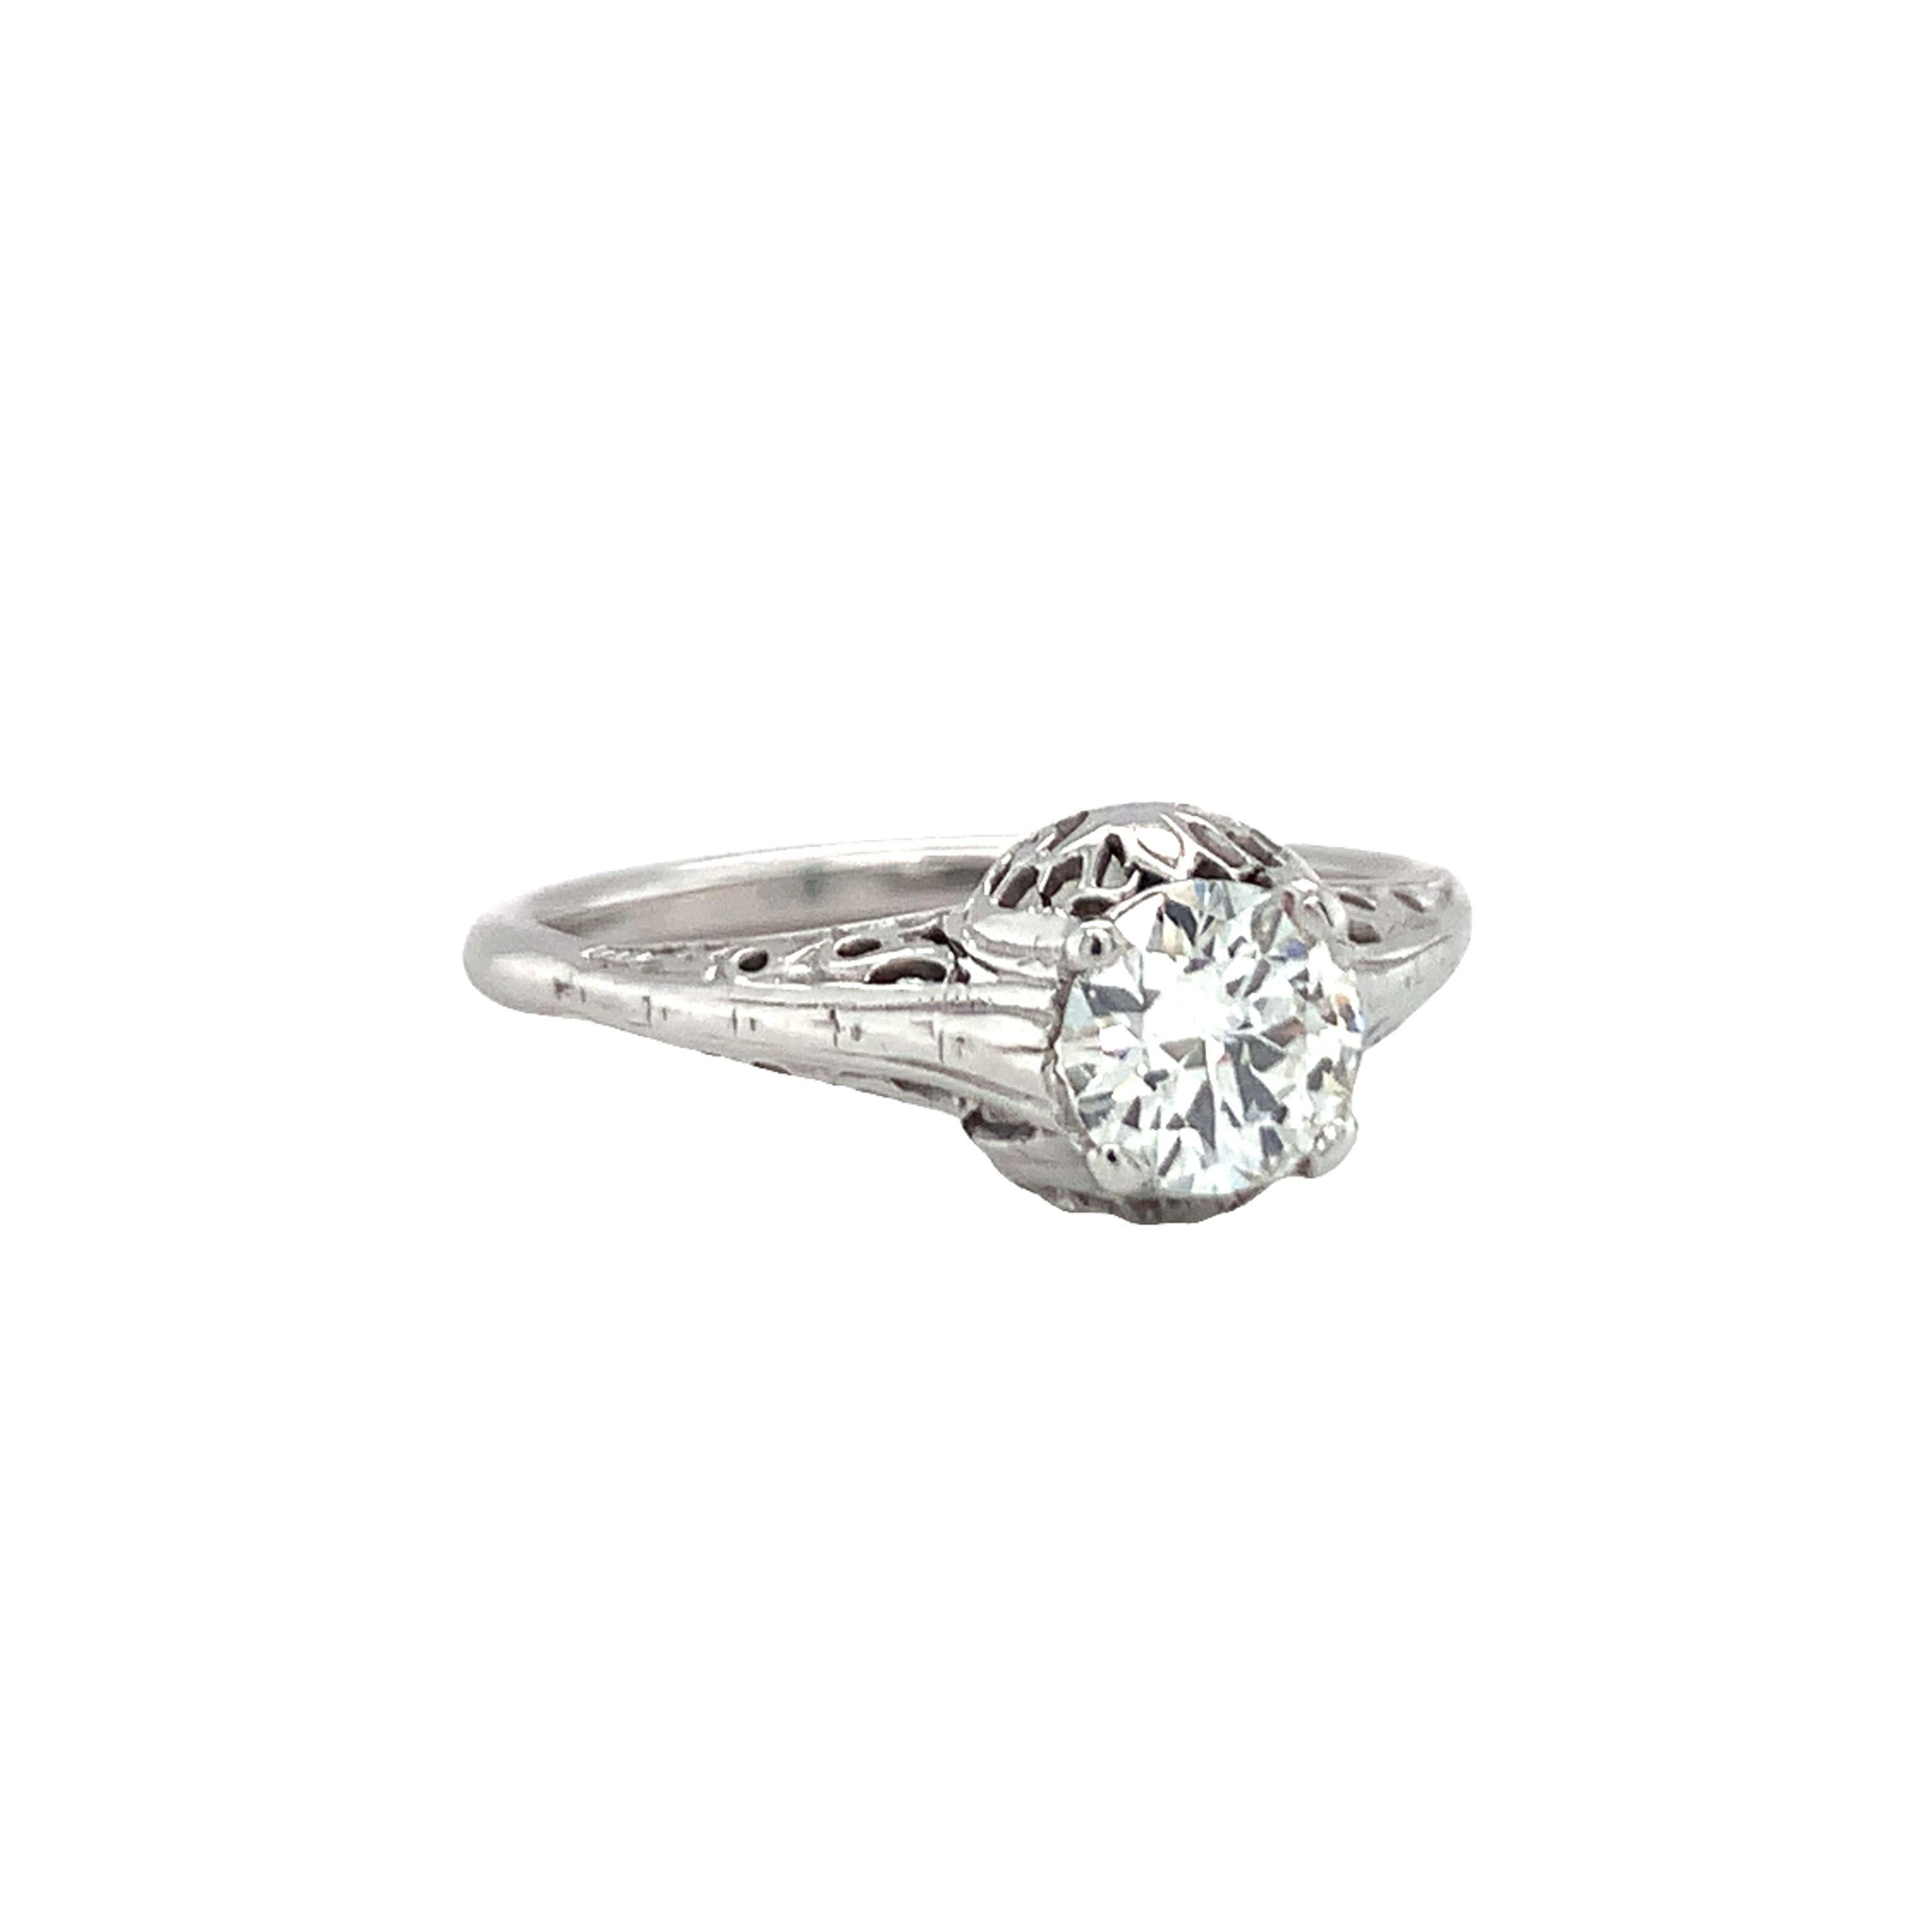 Art Deco diamond solitaire ring handmade in 10K white gold centering one prong set, old European cut diamond weighing 0.70 ct. with I-J color and SI-1 clarity. The ring features open filigree work and engraved details throughout.

Vintage, classic,